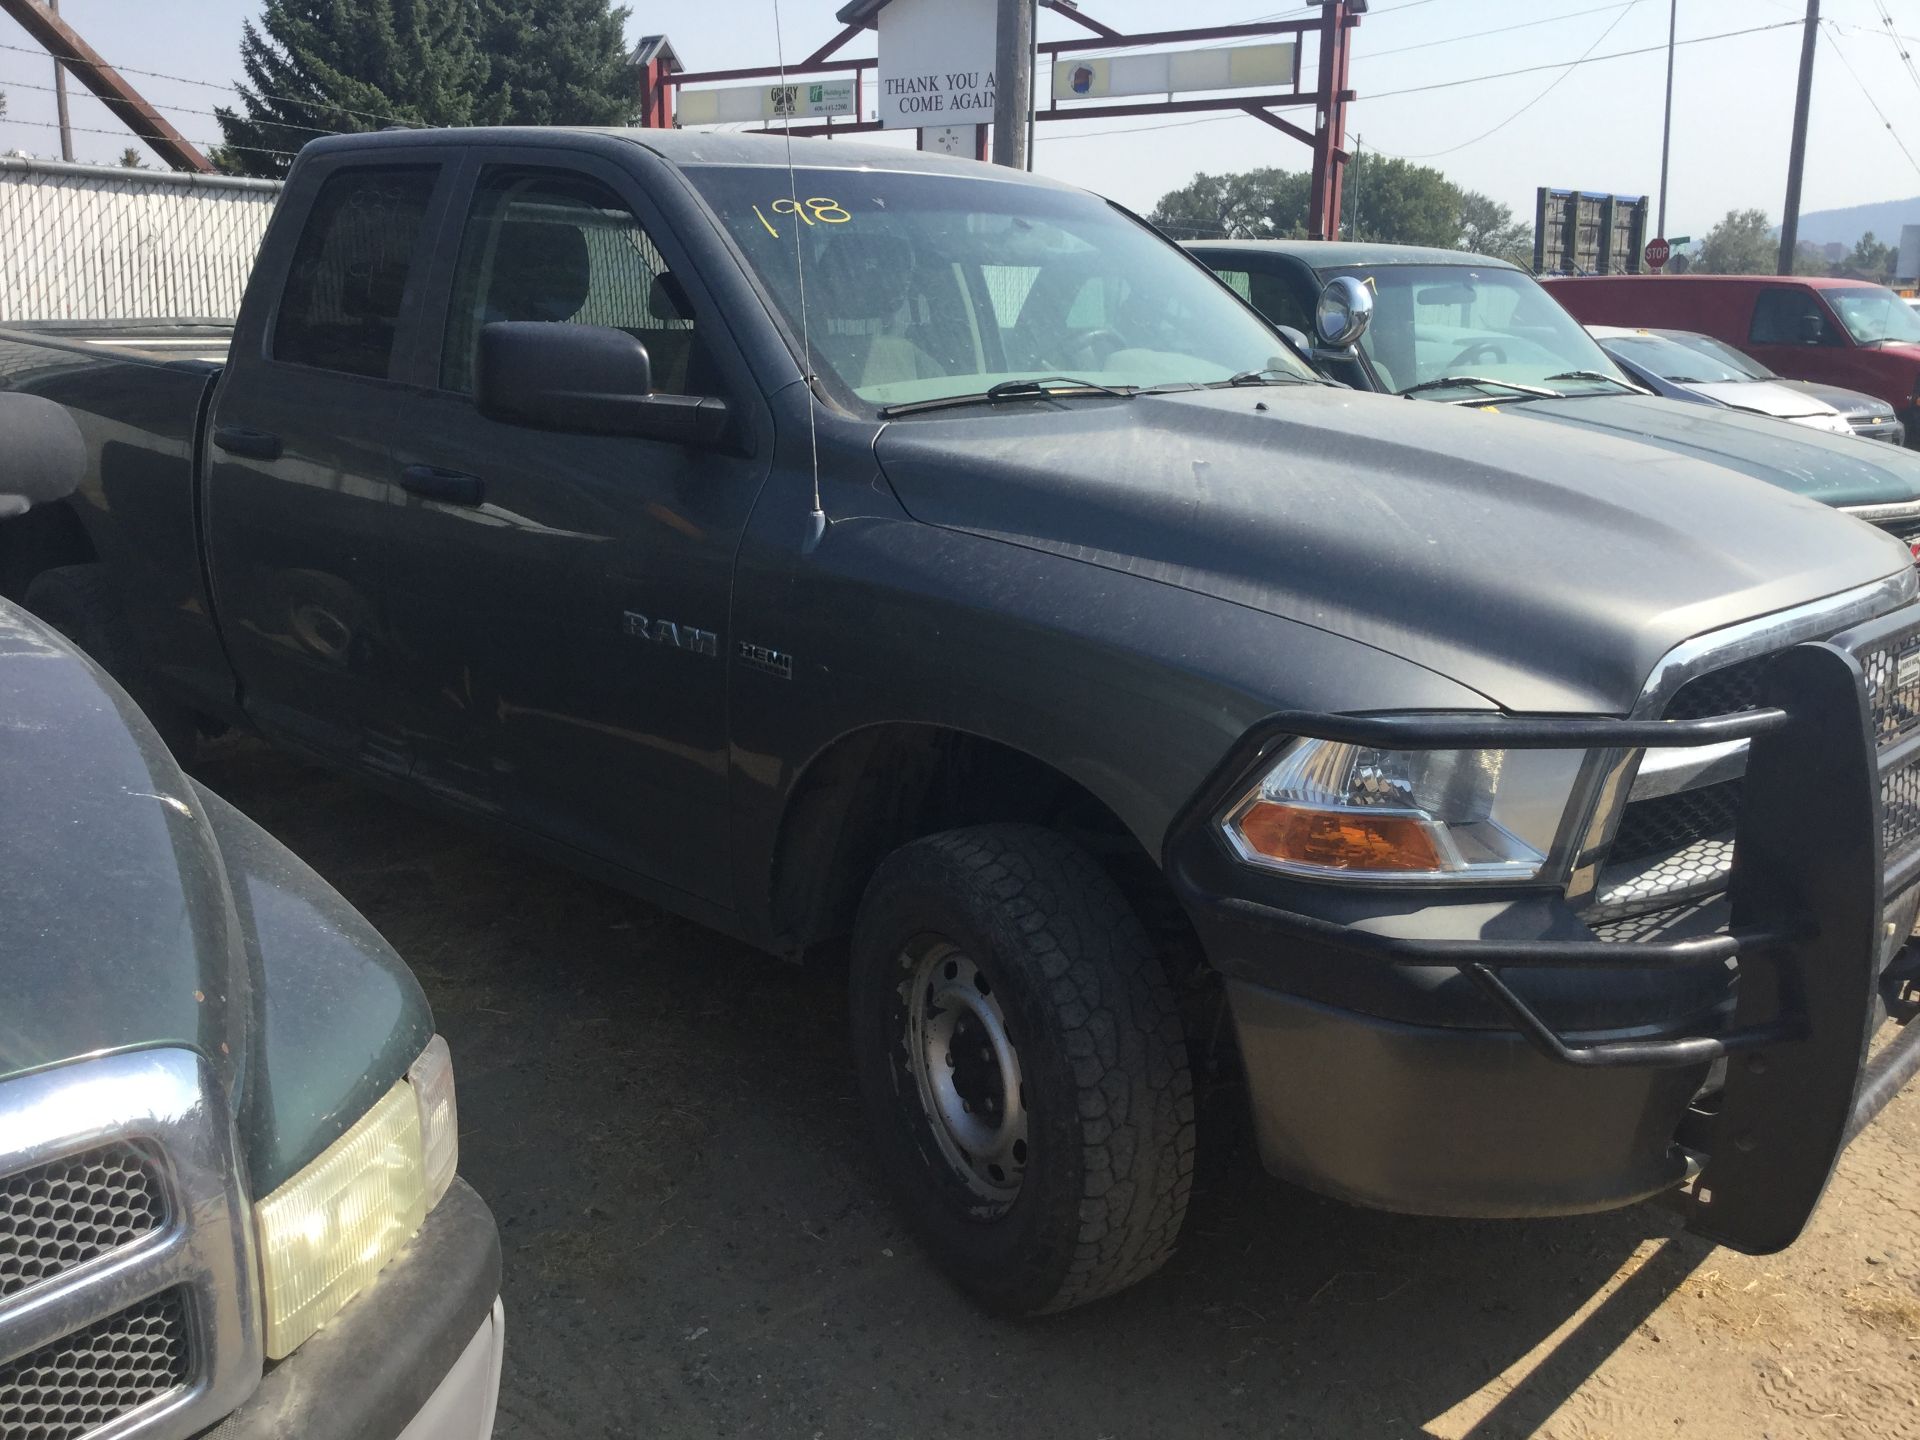 Year: 2009 Make: Dodge Model: 1/2T Type: Pickup-Crew Cab Vin#: 771222 Mileage/Hours: 178164 5.7L, - Image 3 of 4